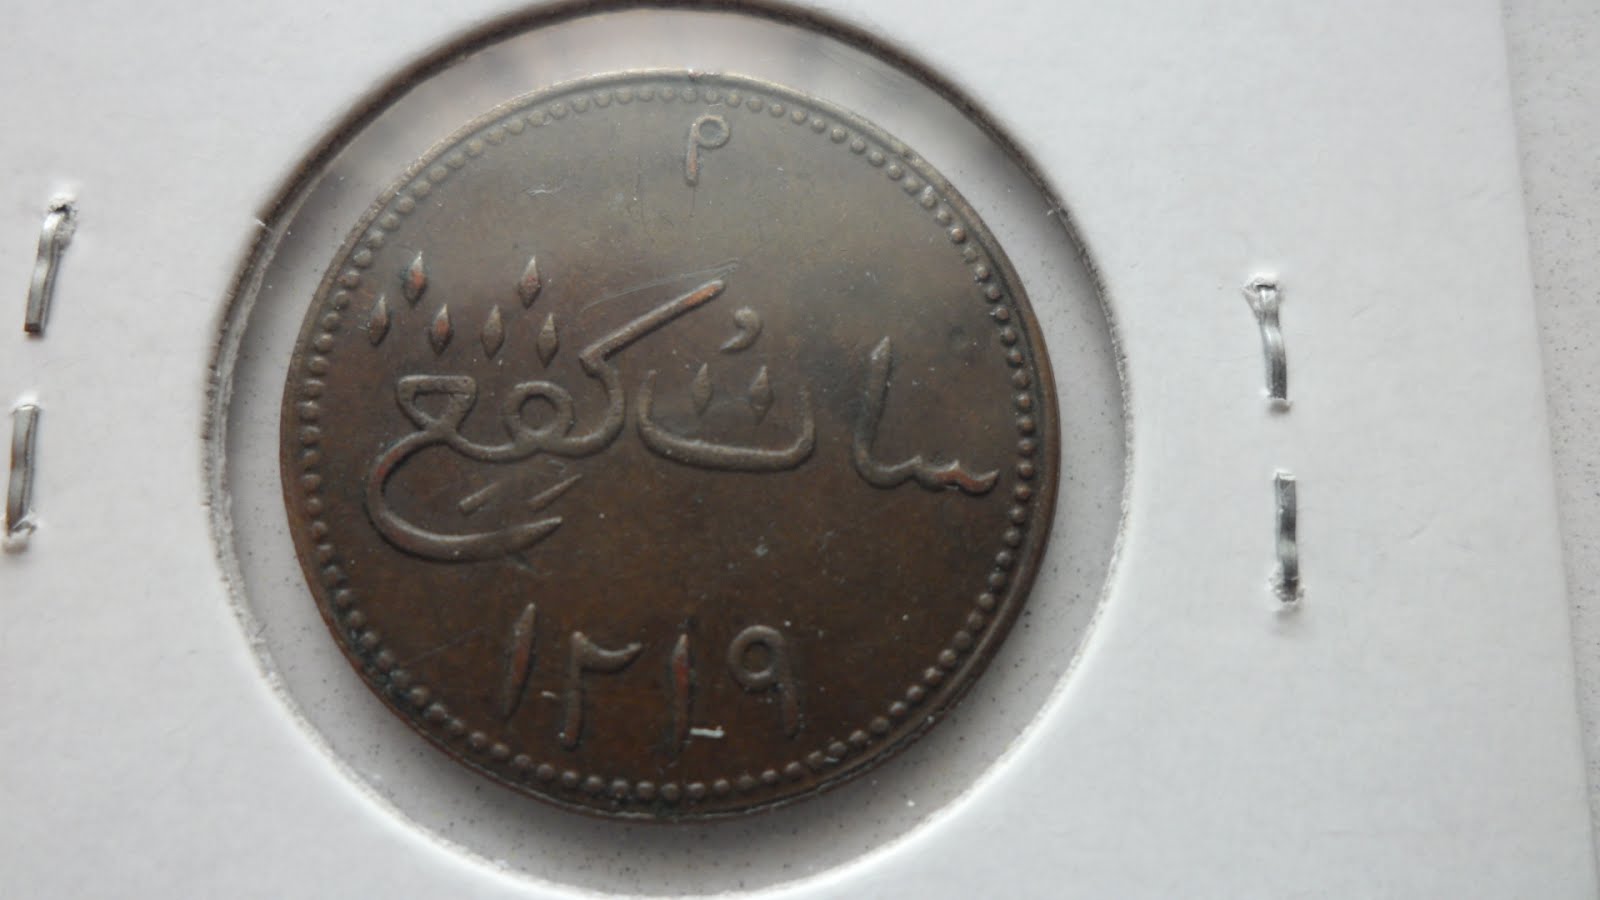 MRBA COIN COLLECTIONS: ISLAND OF SULTANA - issued after 1835